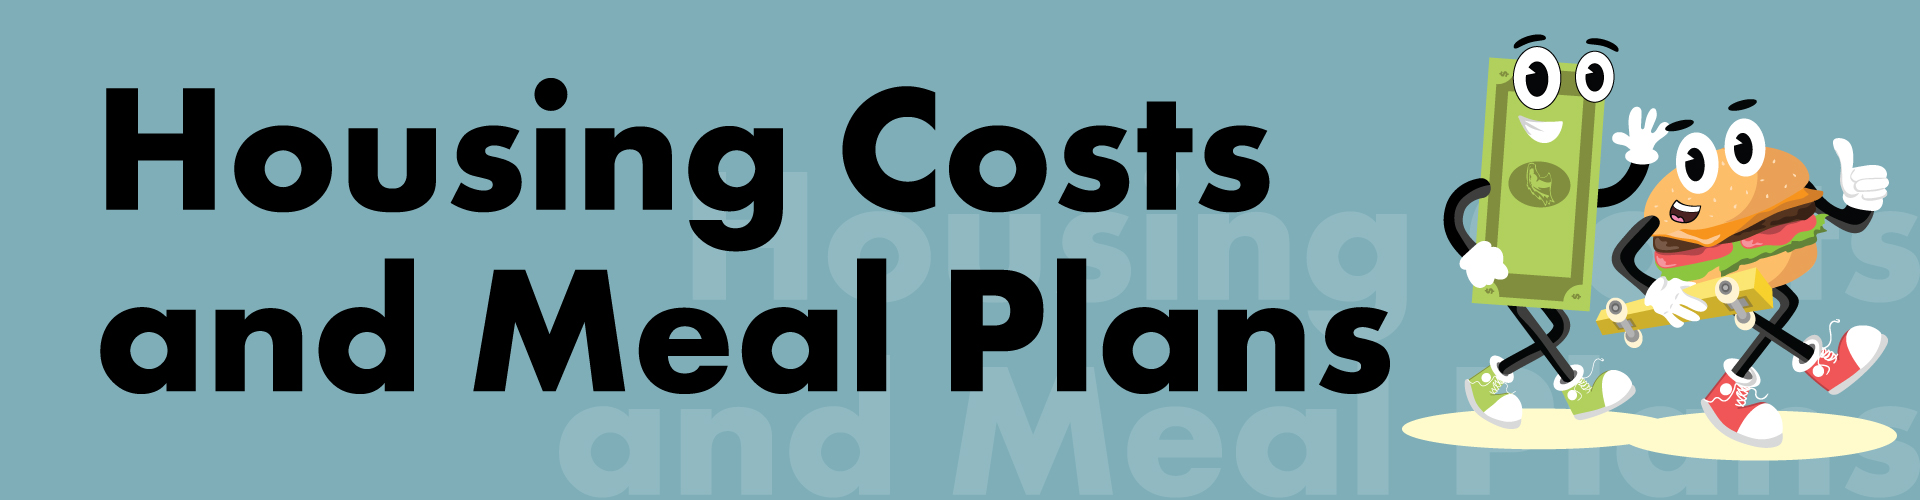 Housing Costs and Meal Plans